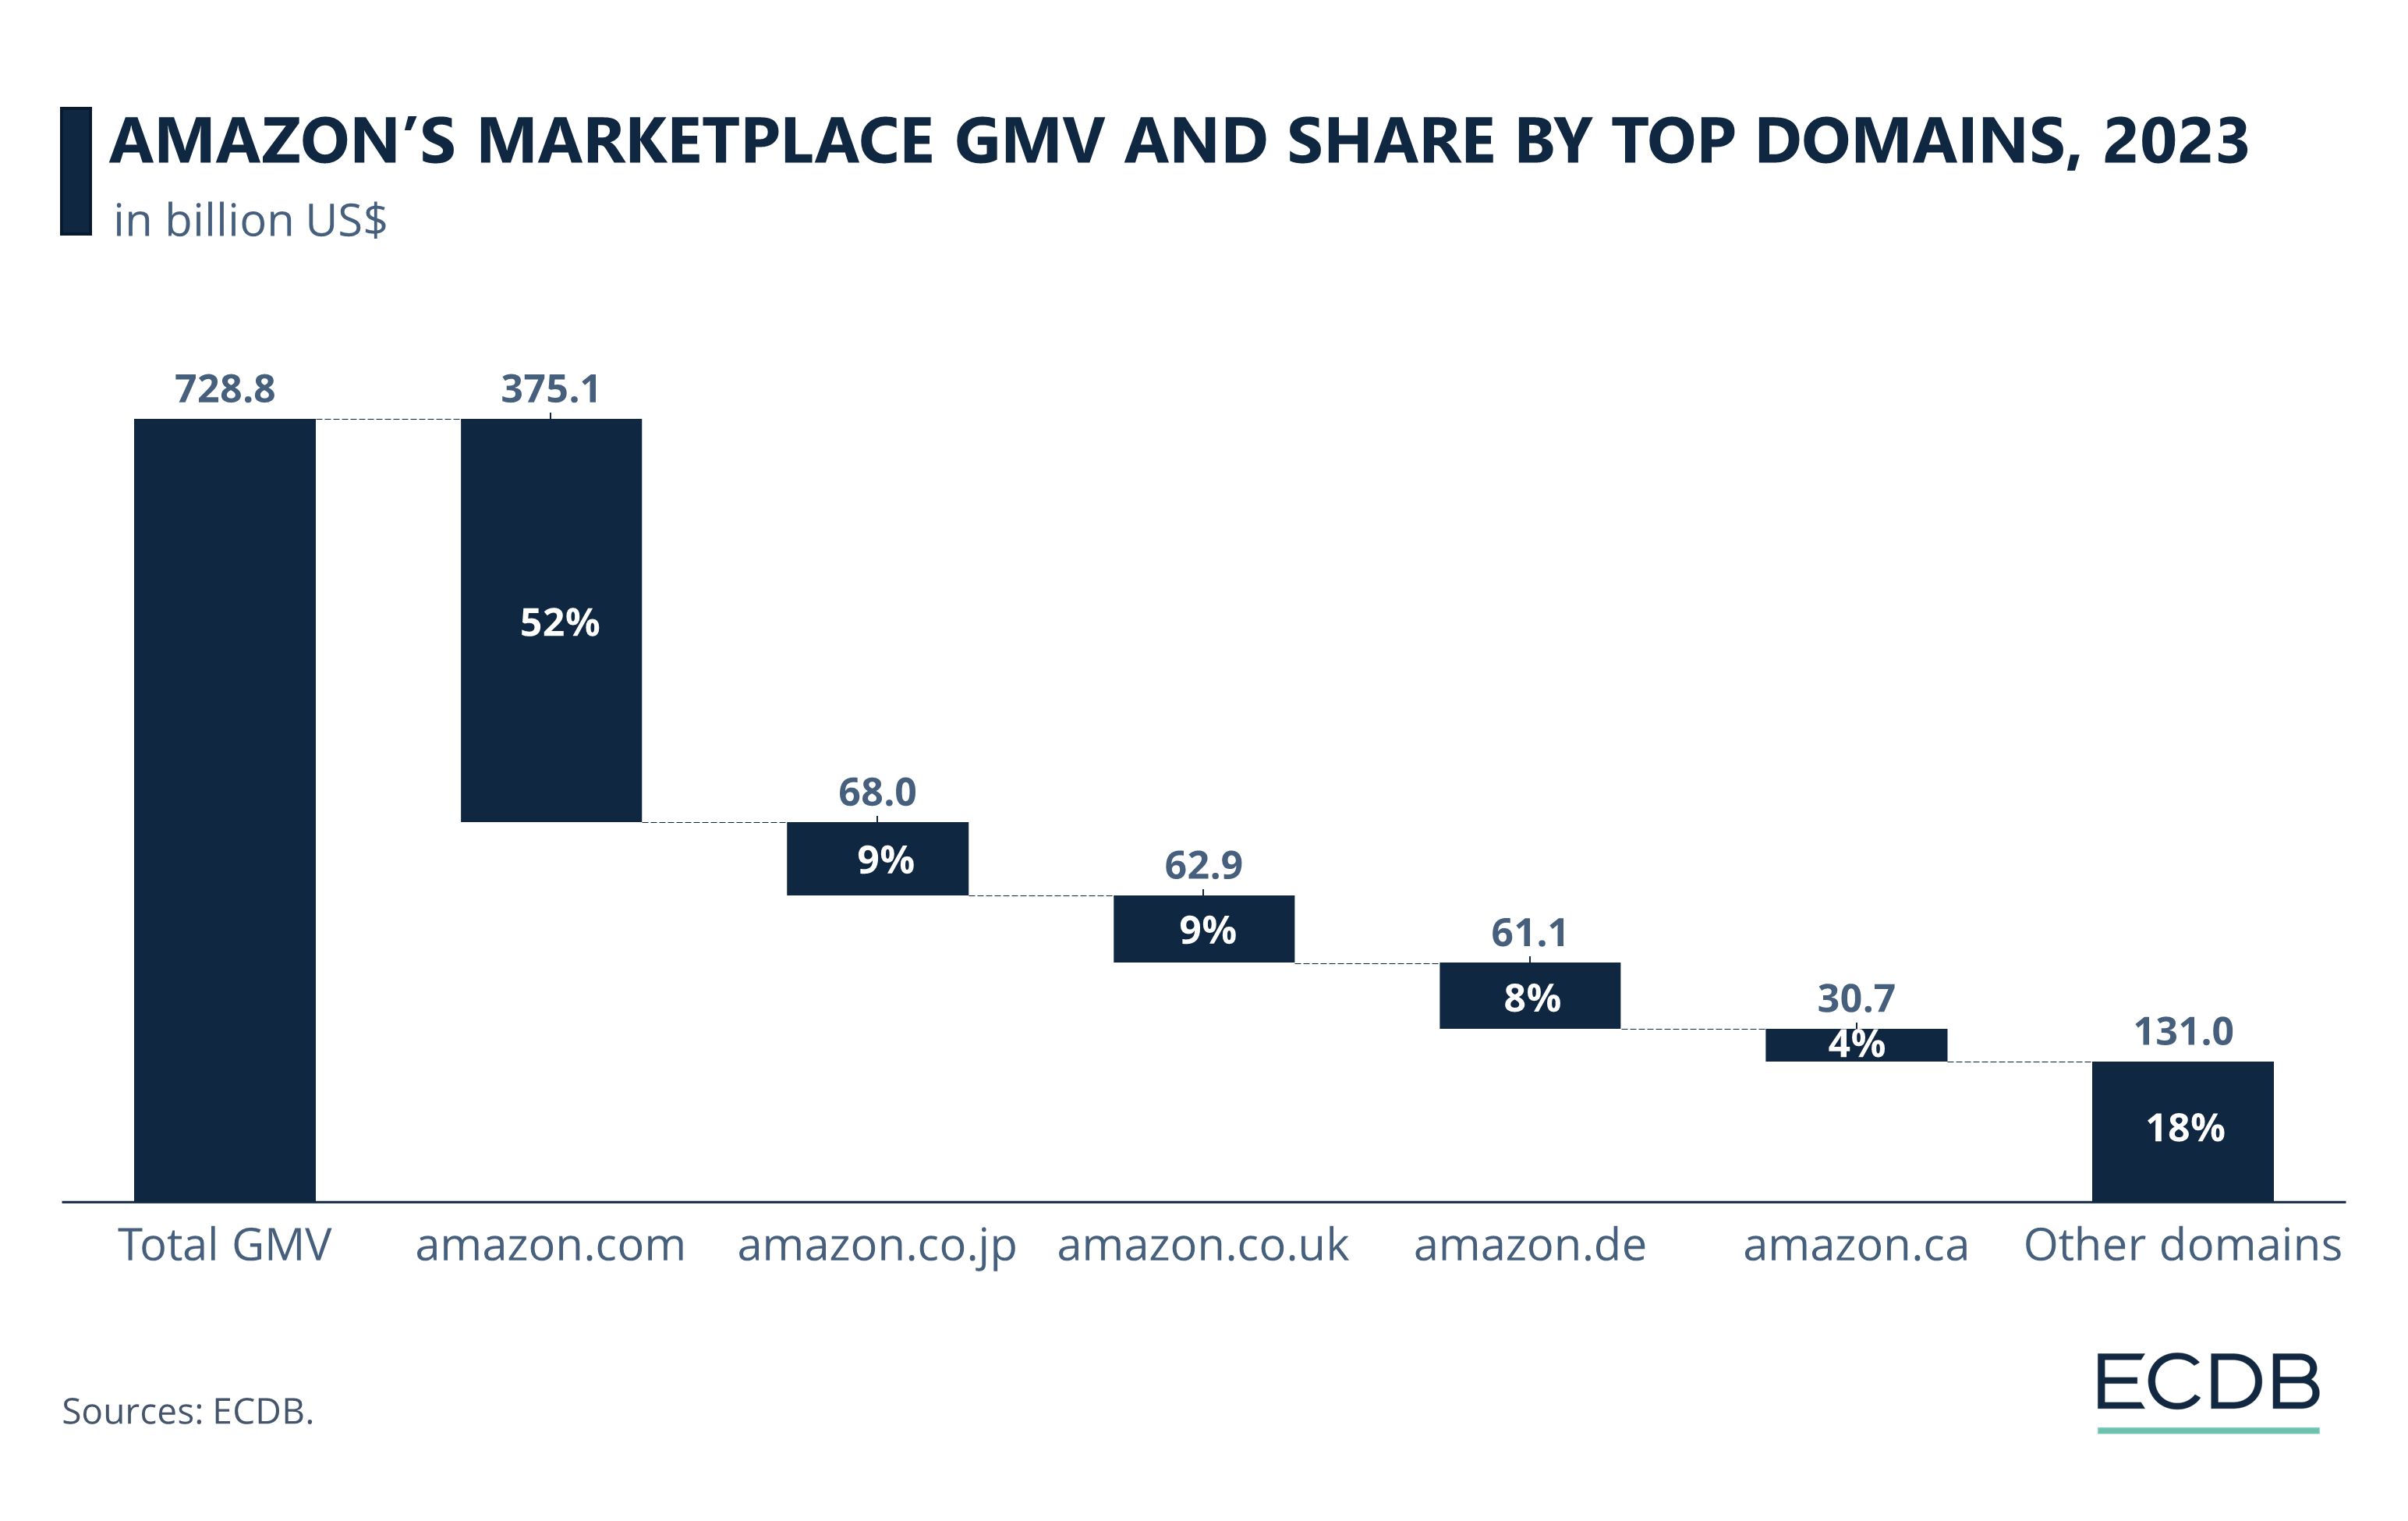 Amazon's Marketplace GMV Growth by Domains, 2022